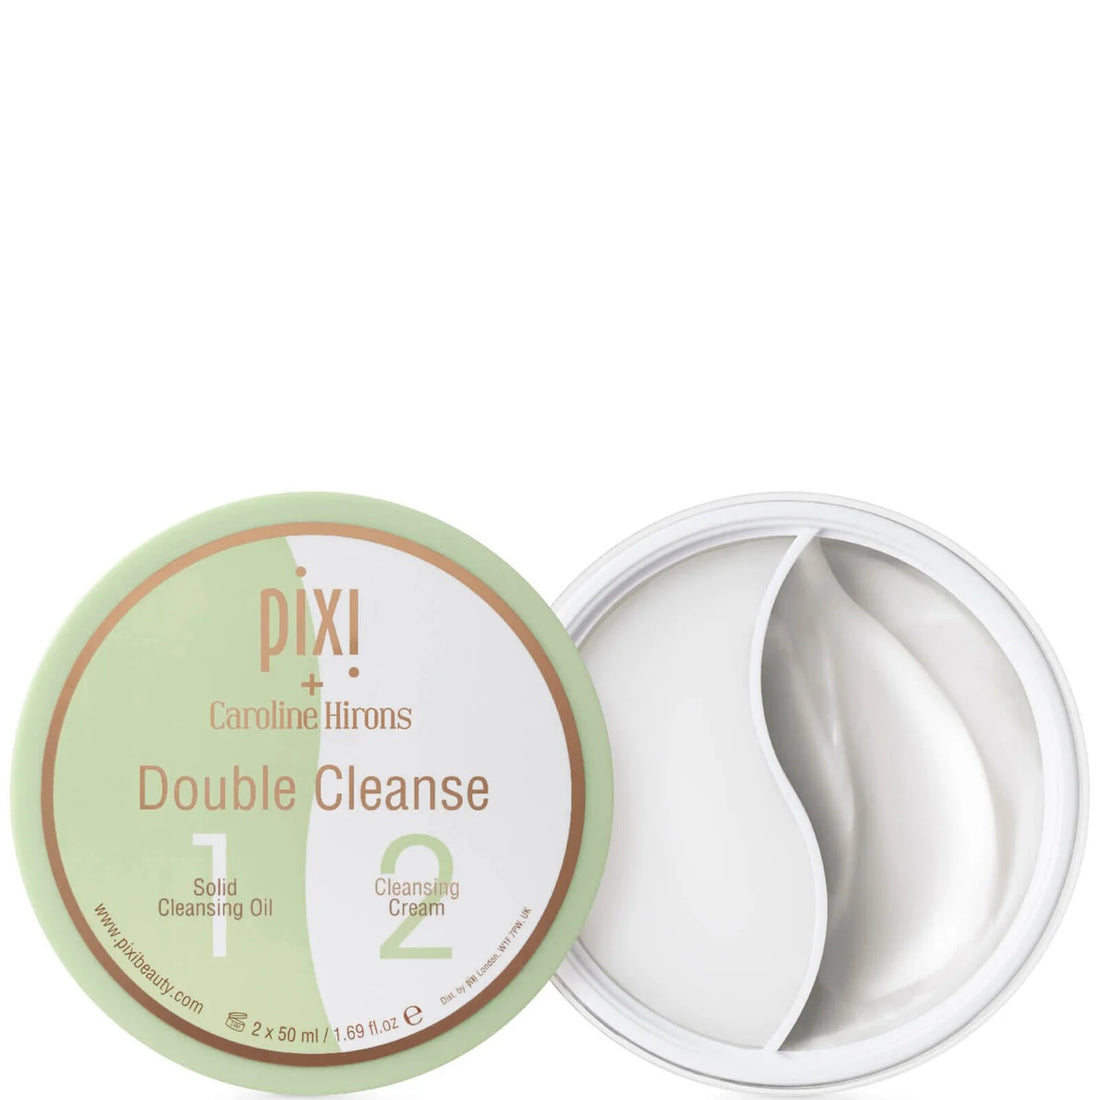 Pixi Double Cleanse Cleansing Balm